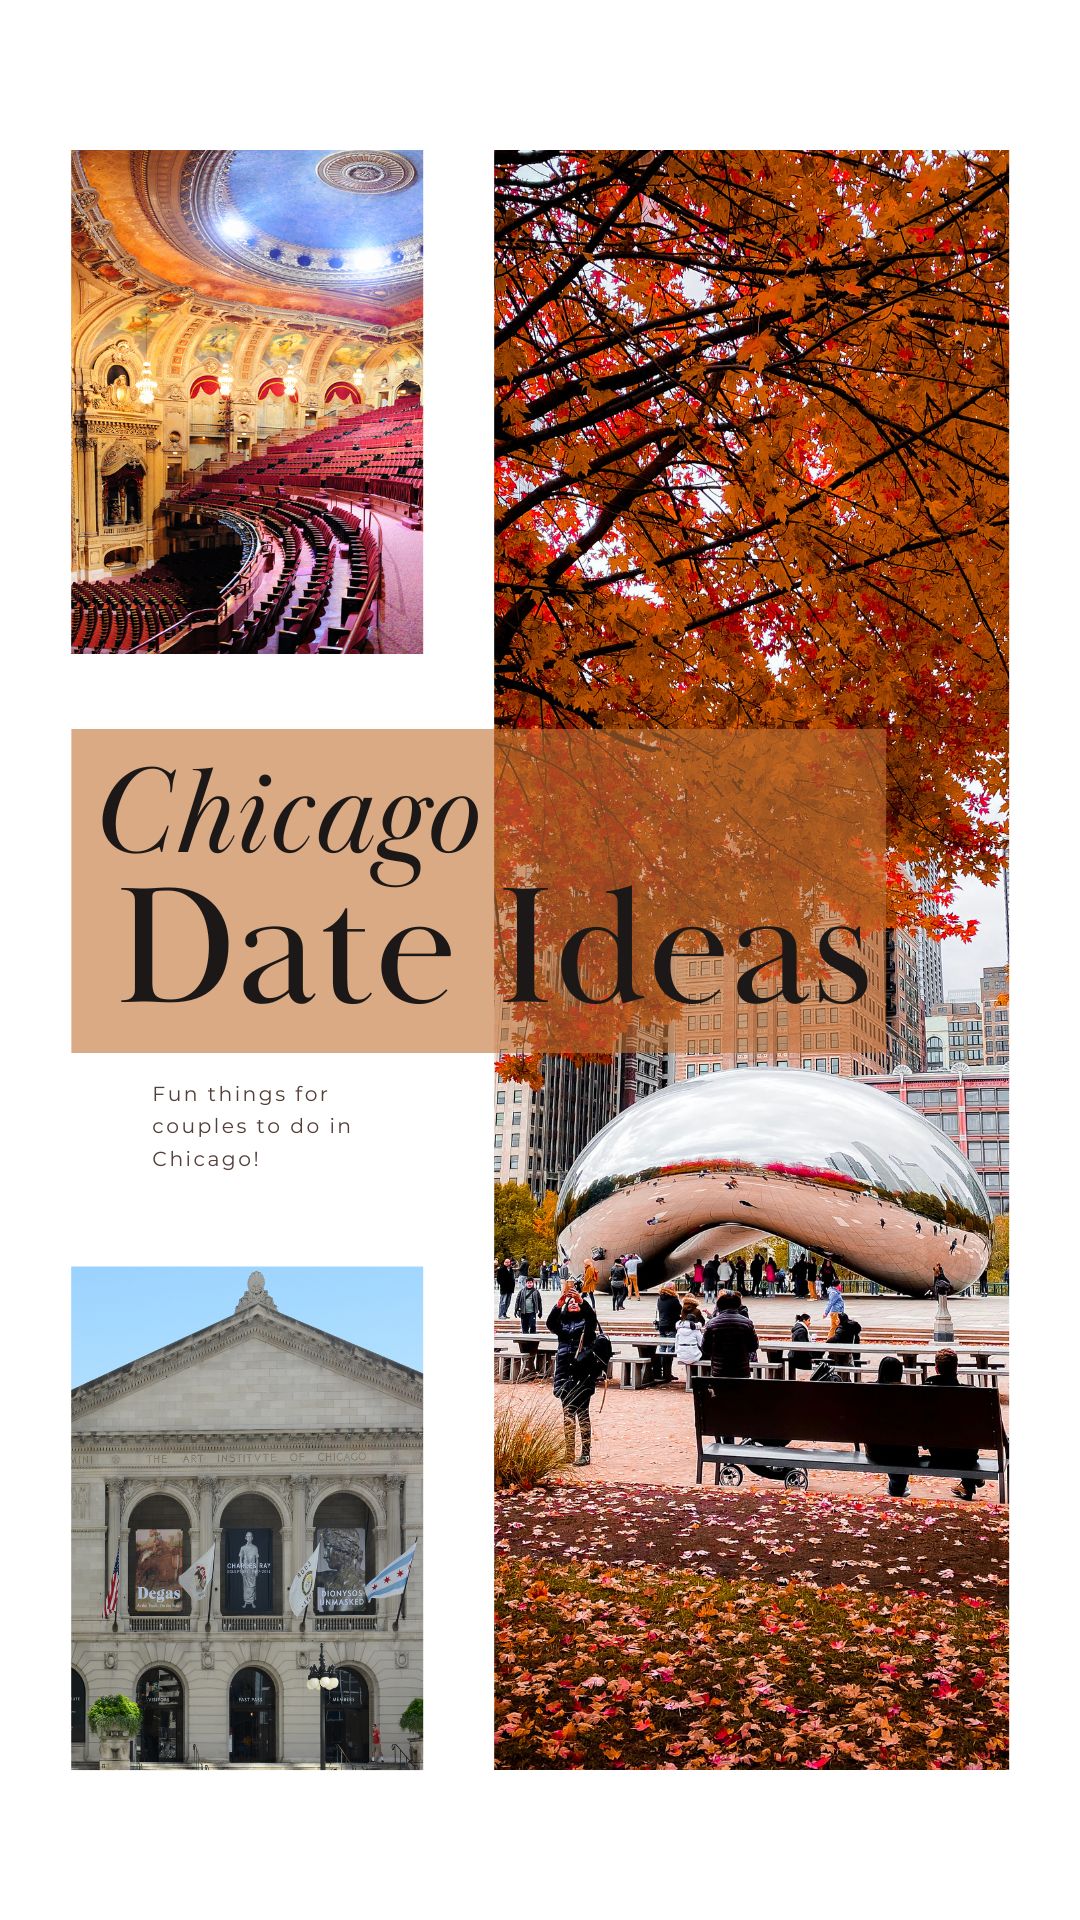 Fun Things for Couples to Do in Chicago